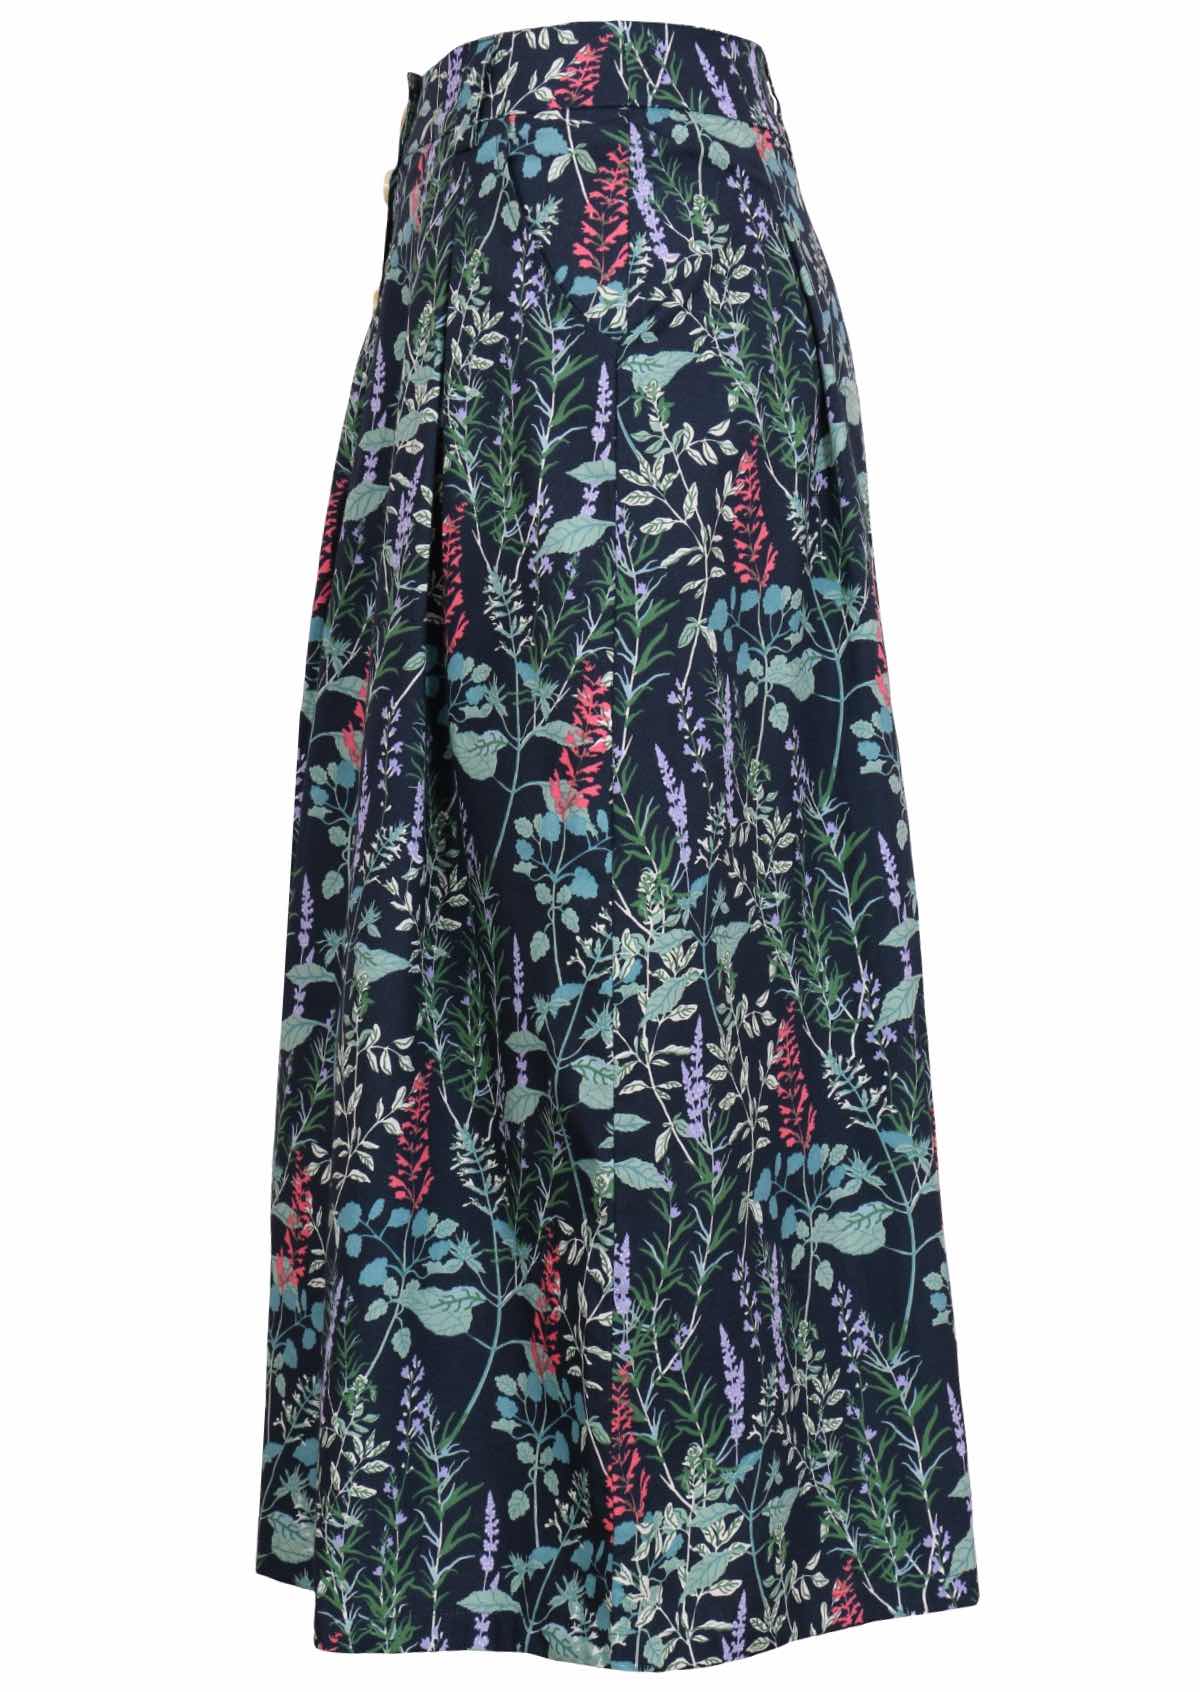 100% cotton floral print skirt with belt loops and pockets